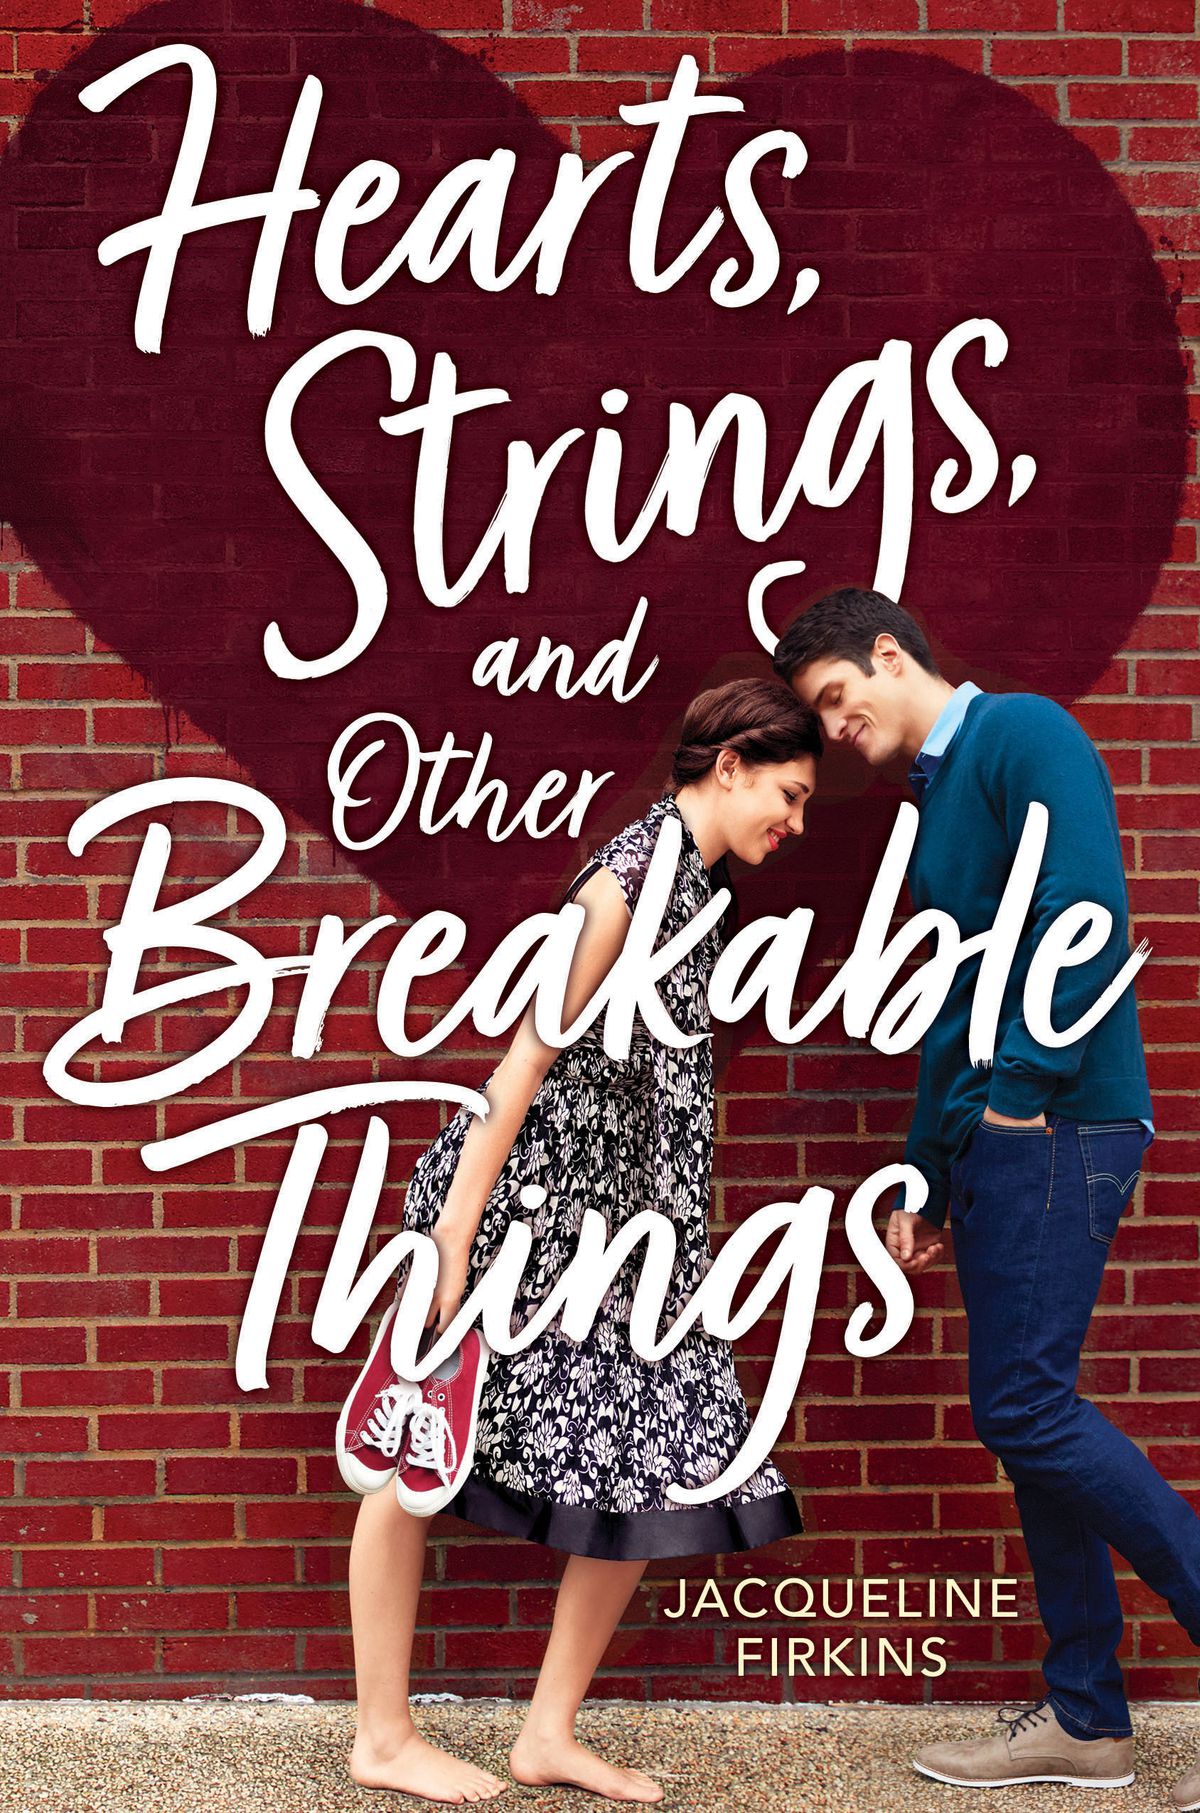 Click for an excerpt from “Hearts, Strings, and Other Breakable Things”&nbsp;by Jacqueline Firkins. 